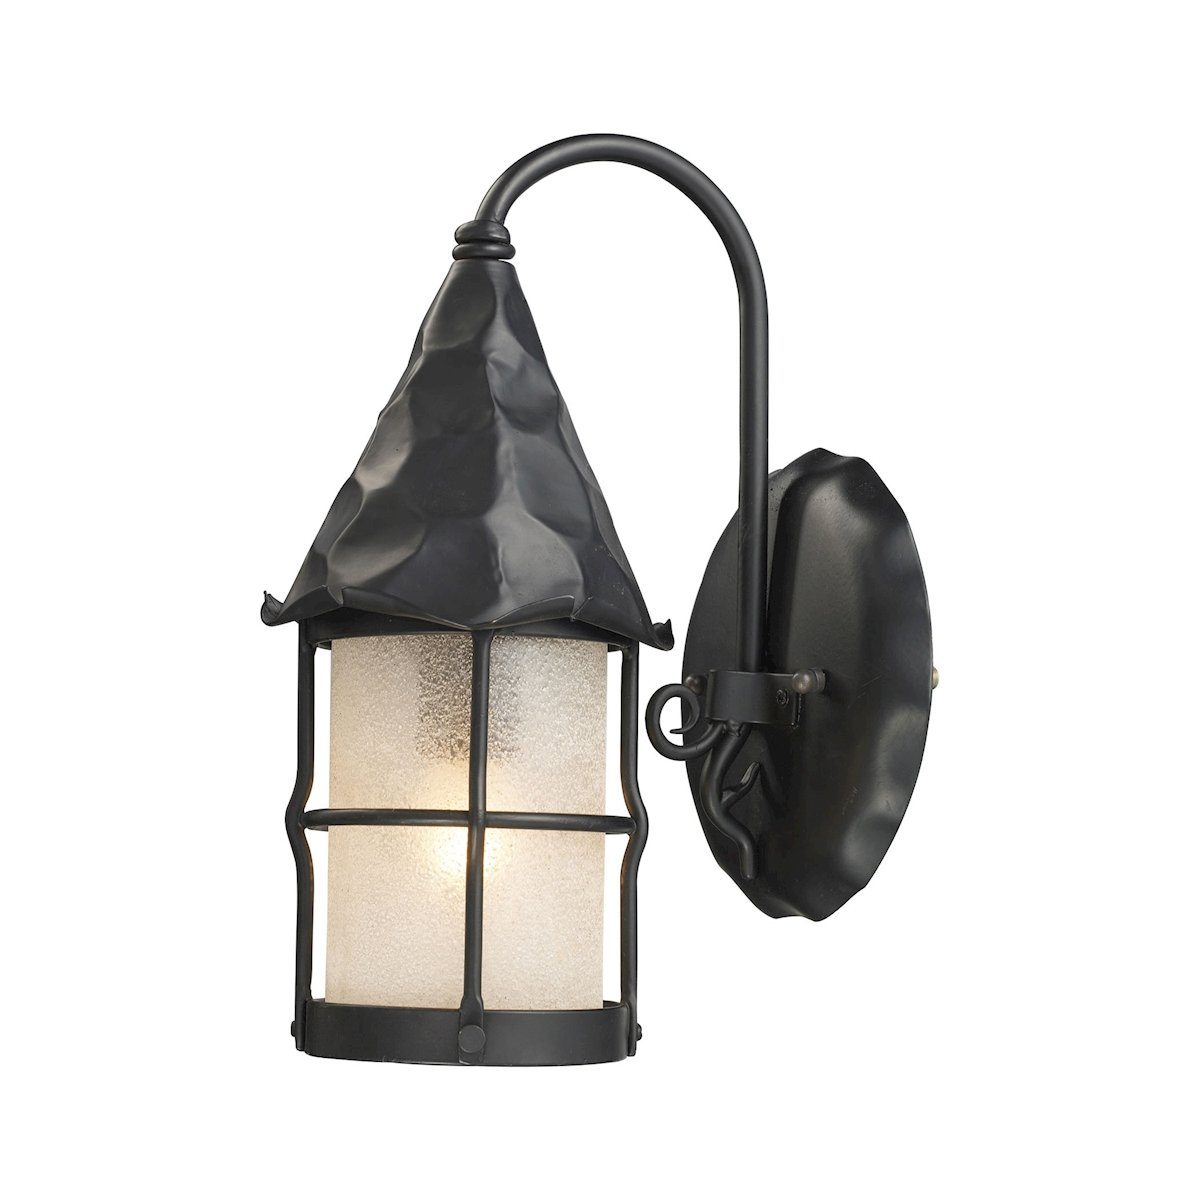 Rustica 1 Light Wall Sconce In Matte Black And Scavo Glass Outdoor Wall Elk Lighting 